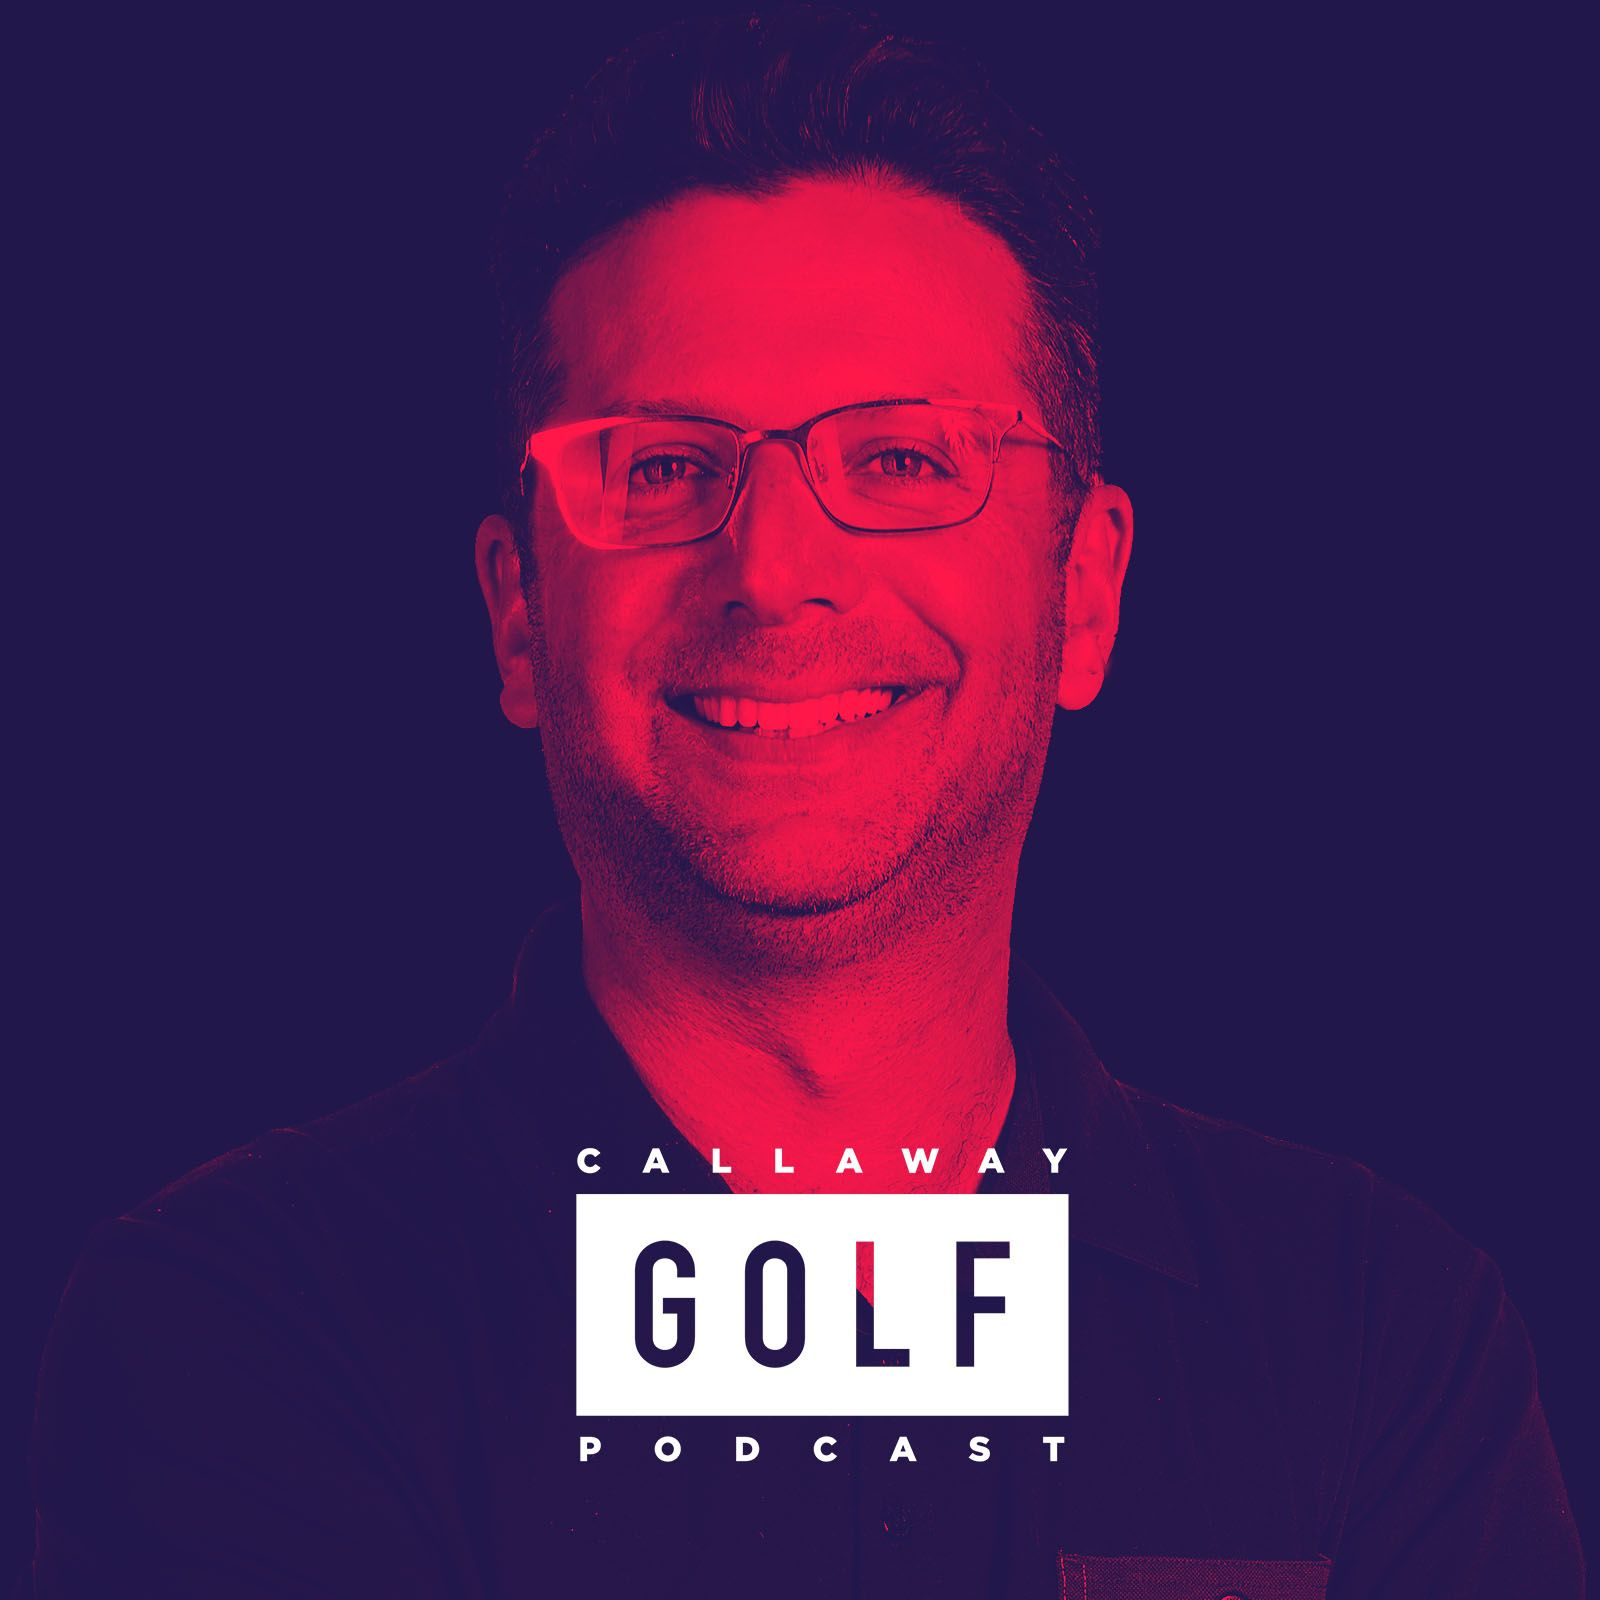 NEW JAWS MD5 RELEASE, Walker Cup & PGA Tour Are BACK, NFL Recap || The ShipShow 315